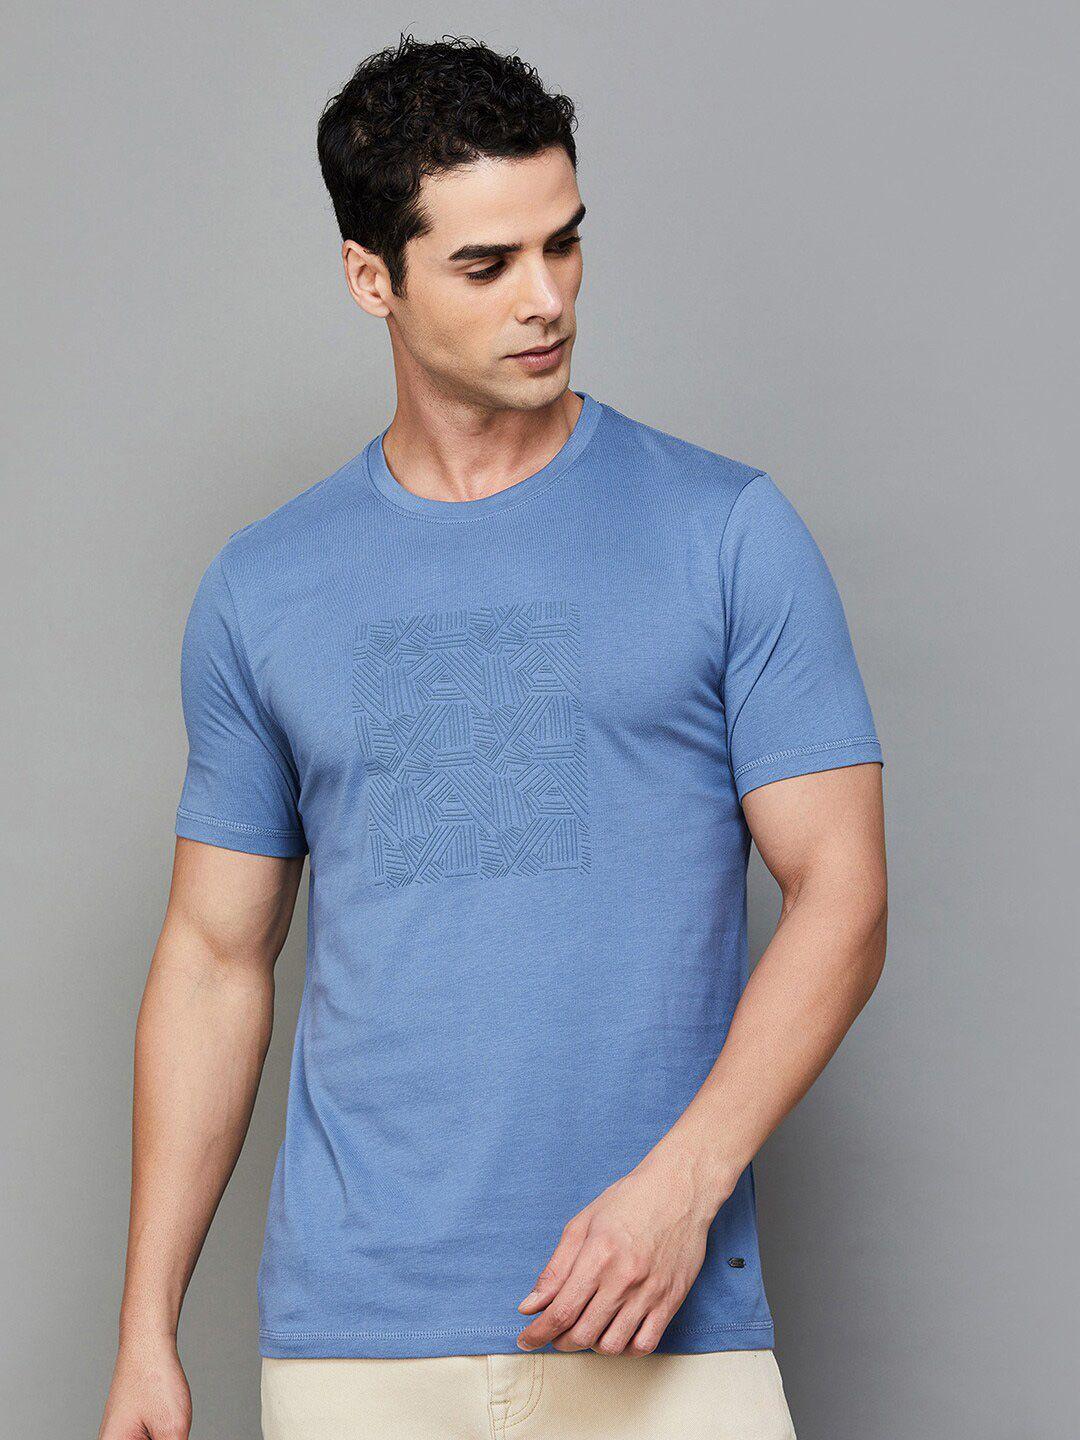 code by lifestyle abstract printed cotton tshirt